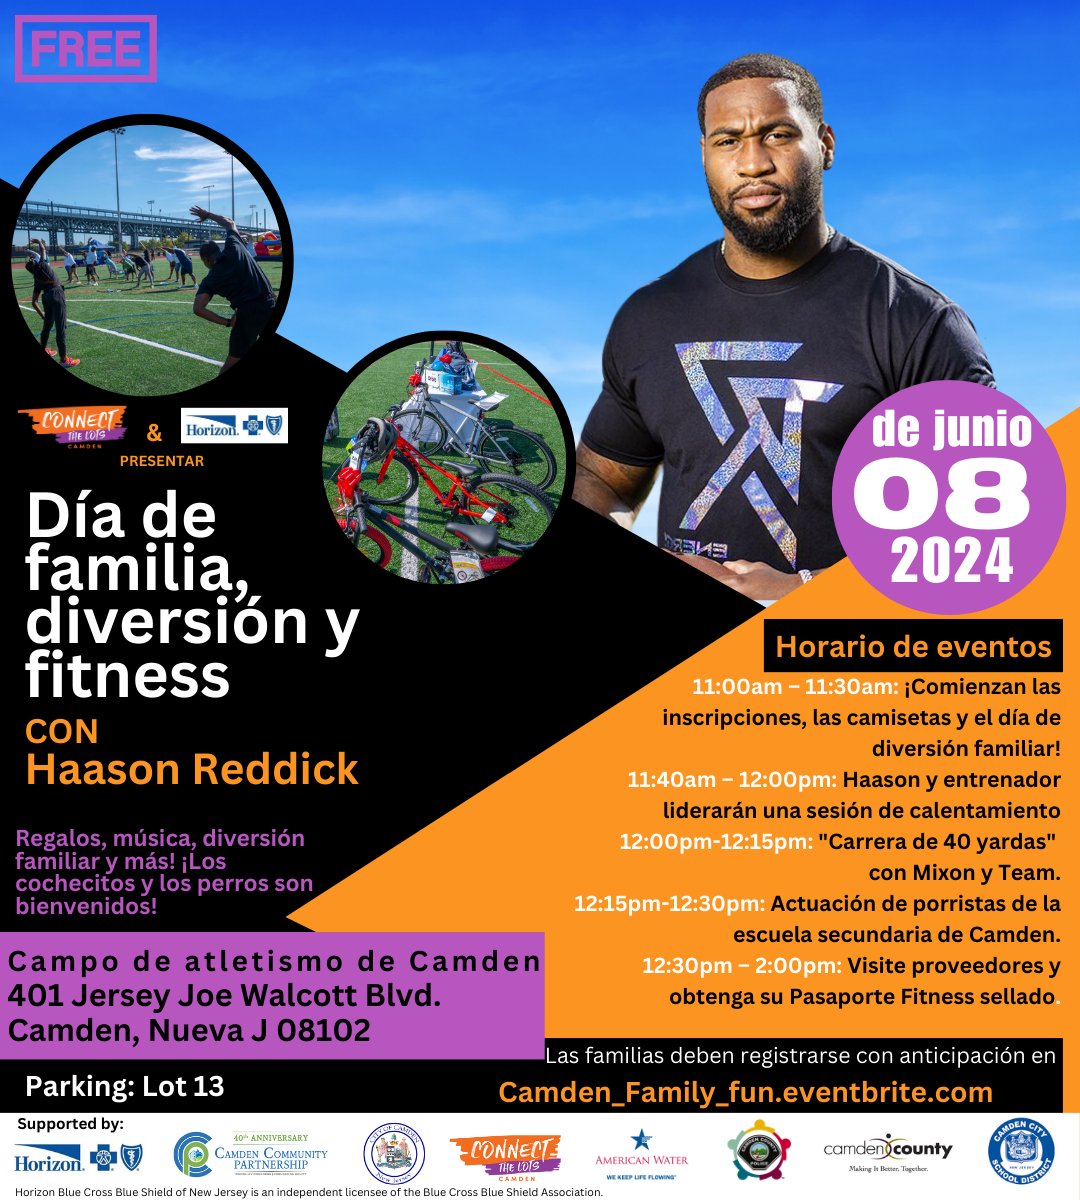 Join NFL-All Pro and Camden native, Haason Reddick for an action-packed day of fitness challenges, giveaways, & fun at the Camden Athletic Fields on June 8th! Register by visiting: eventbrite.com/e/camden-famil…